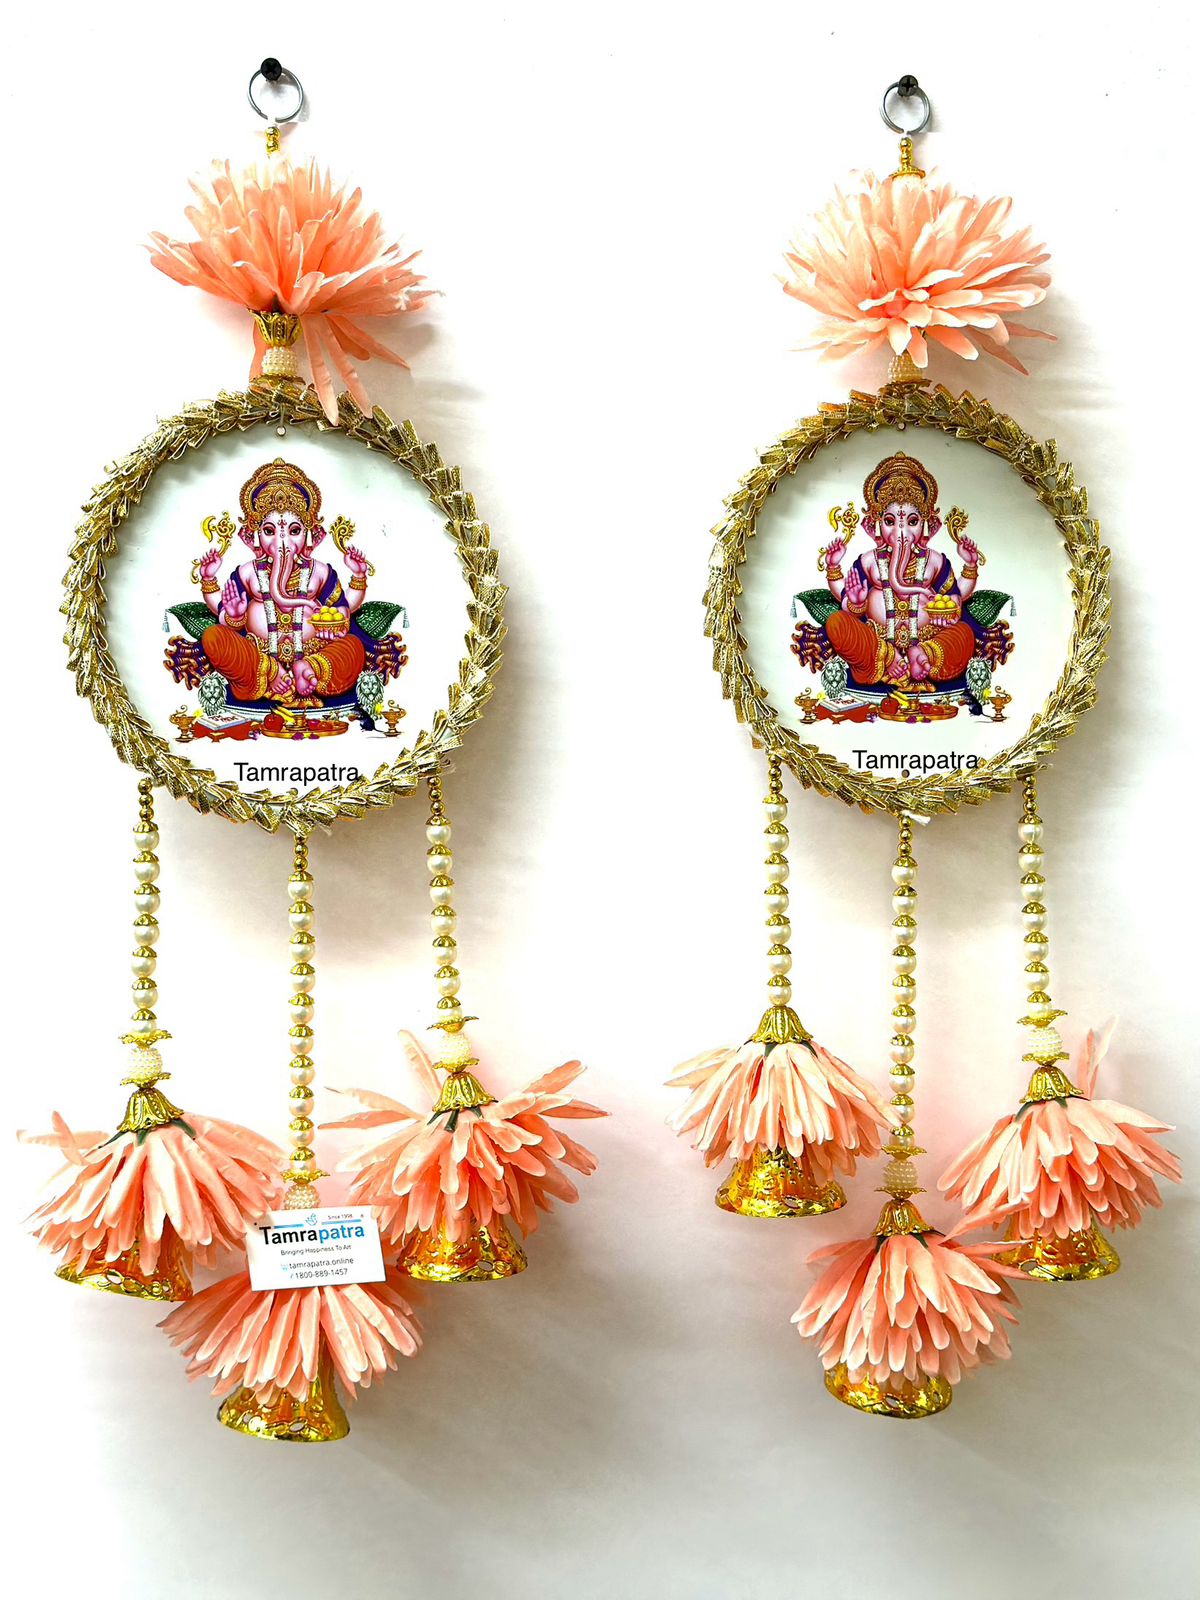 Ganesh Circle Hangings Floral Exclusive Gifts Décor With Bells From Tamrapatra